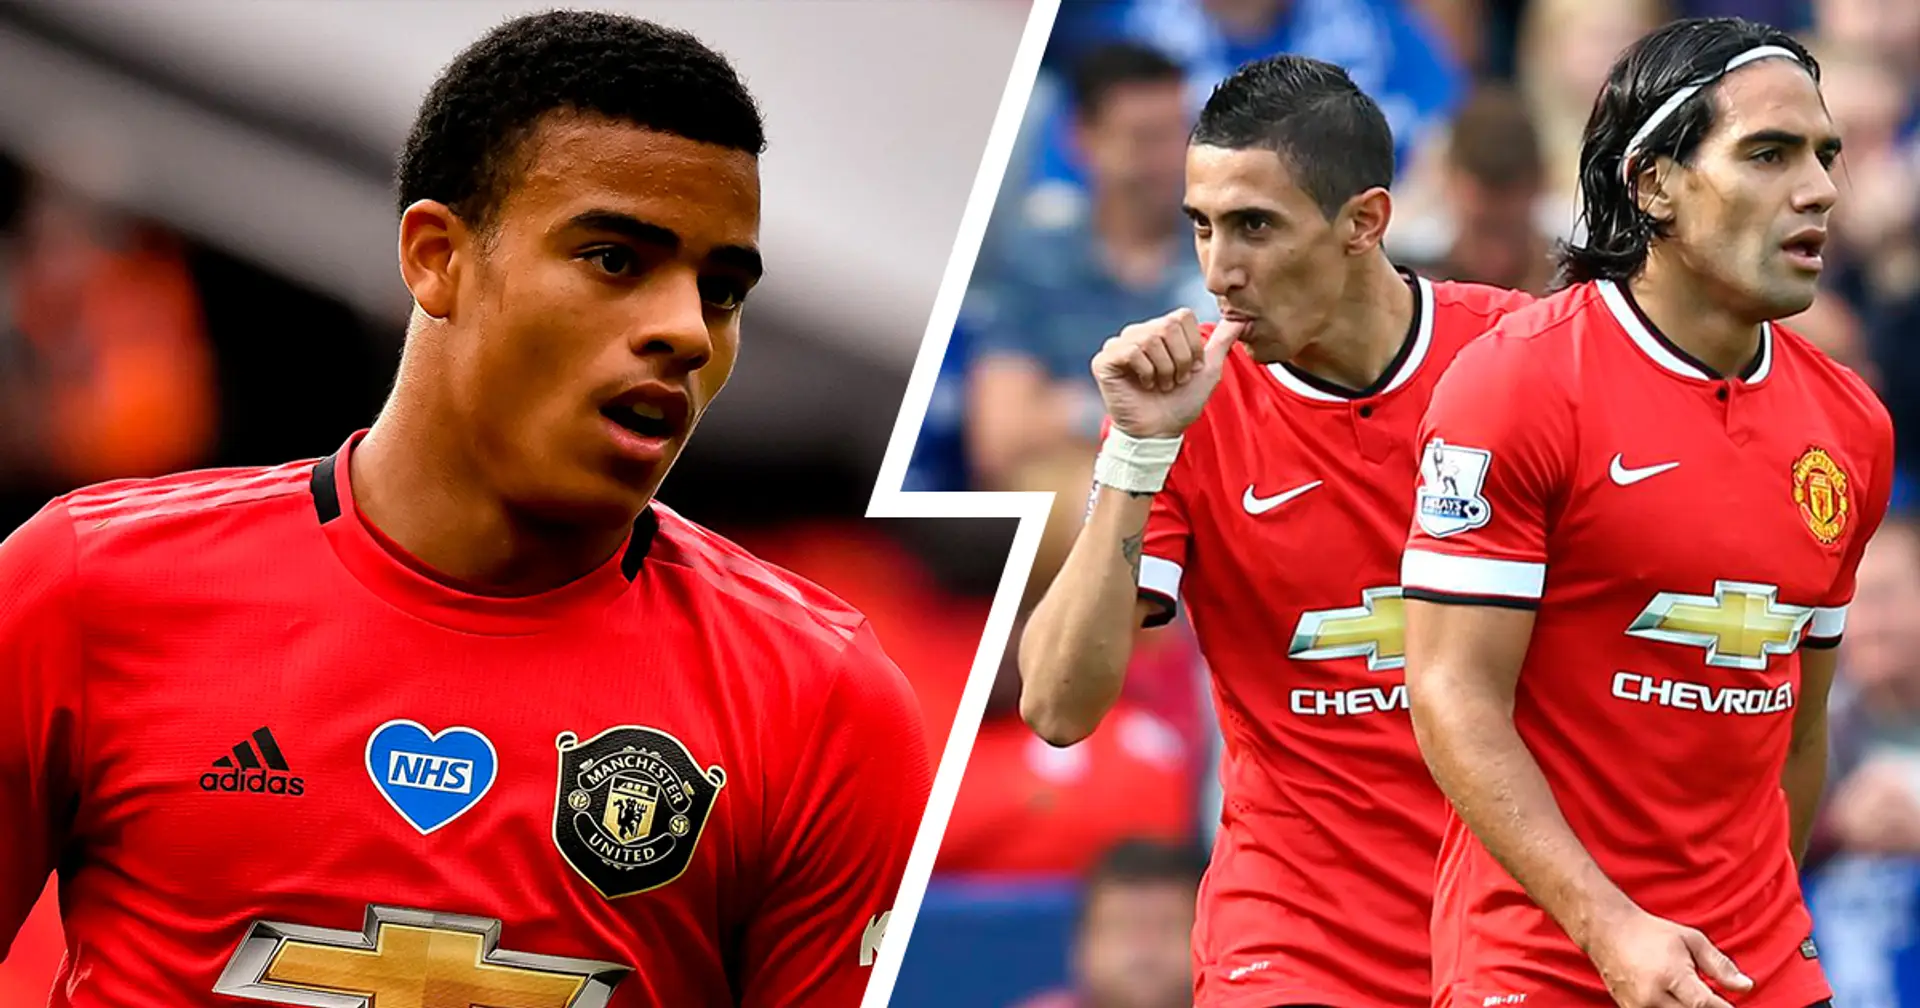 Numbers show Mason Greenwood has now scored more season goals than 3 high-priced stars in their United careers!